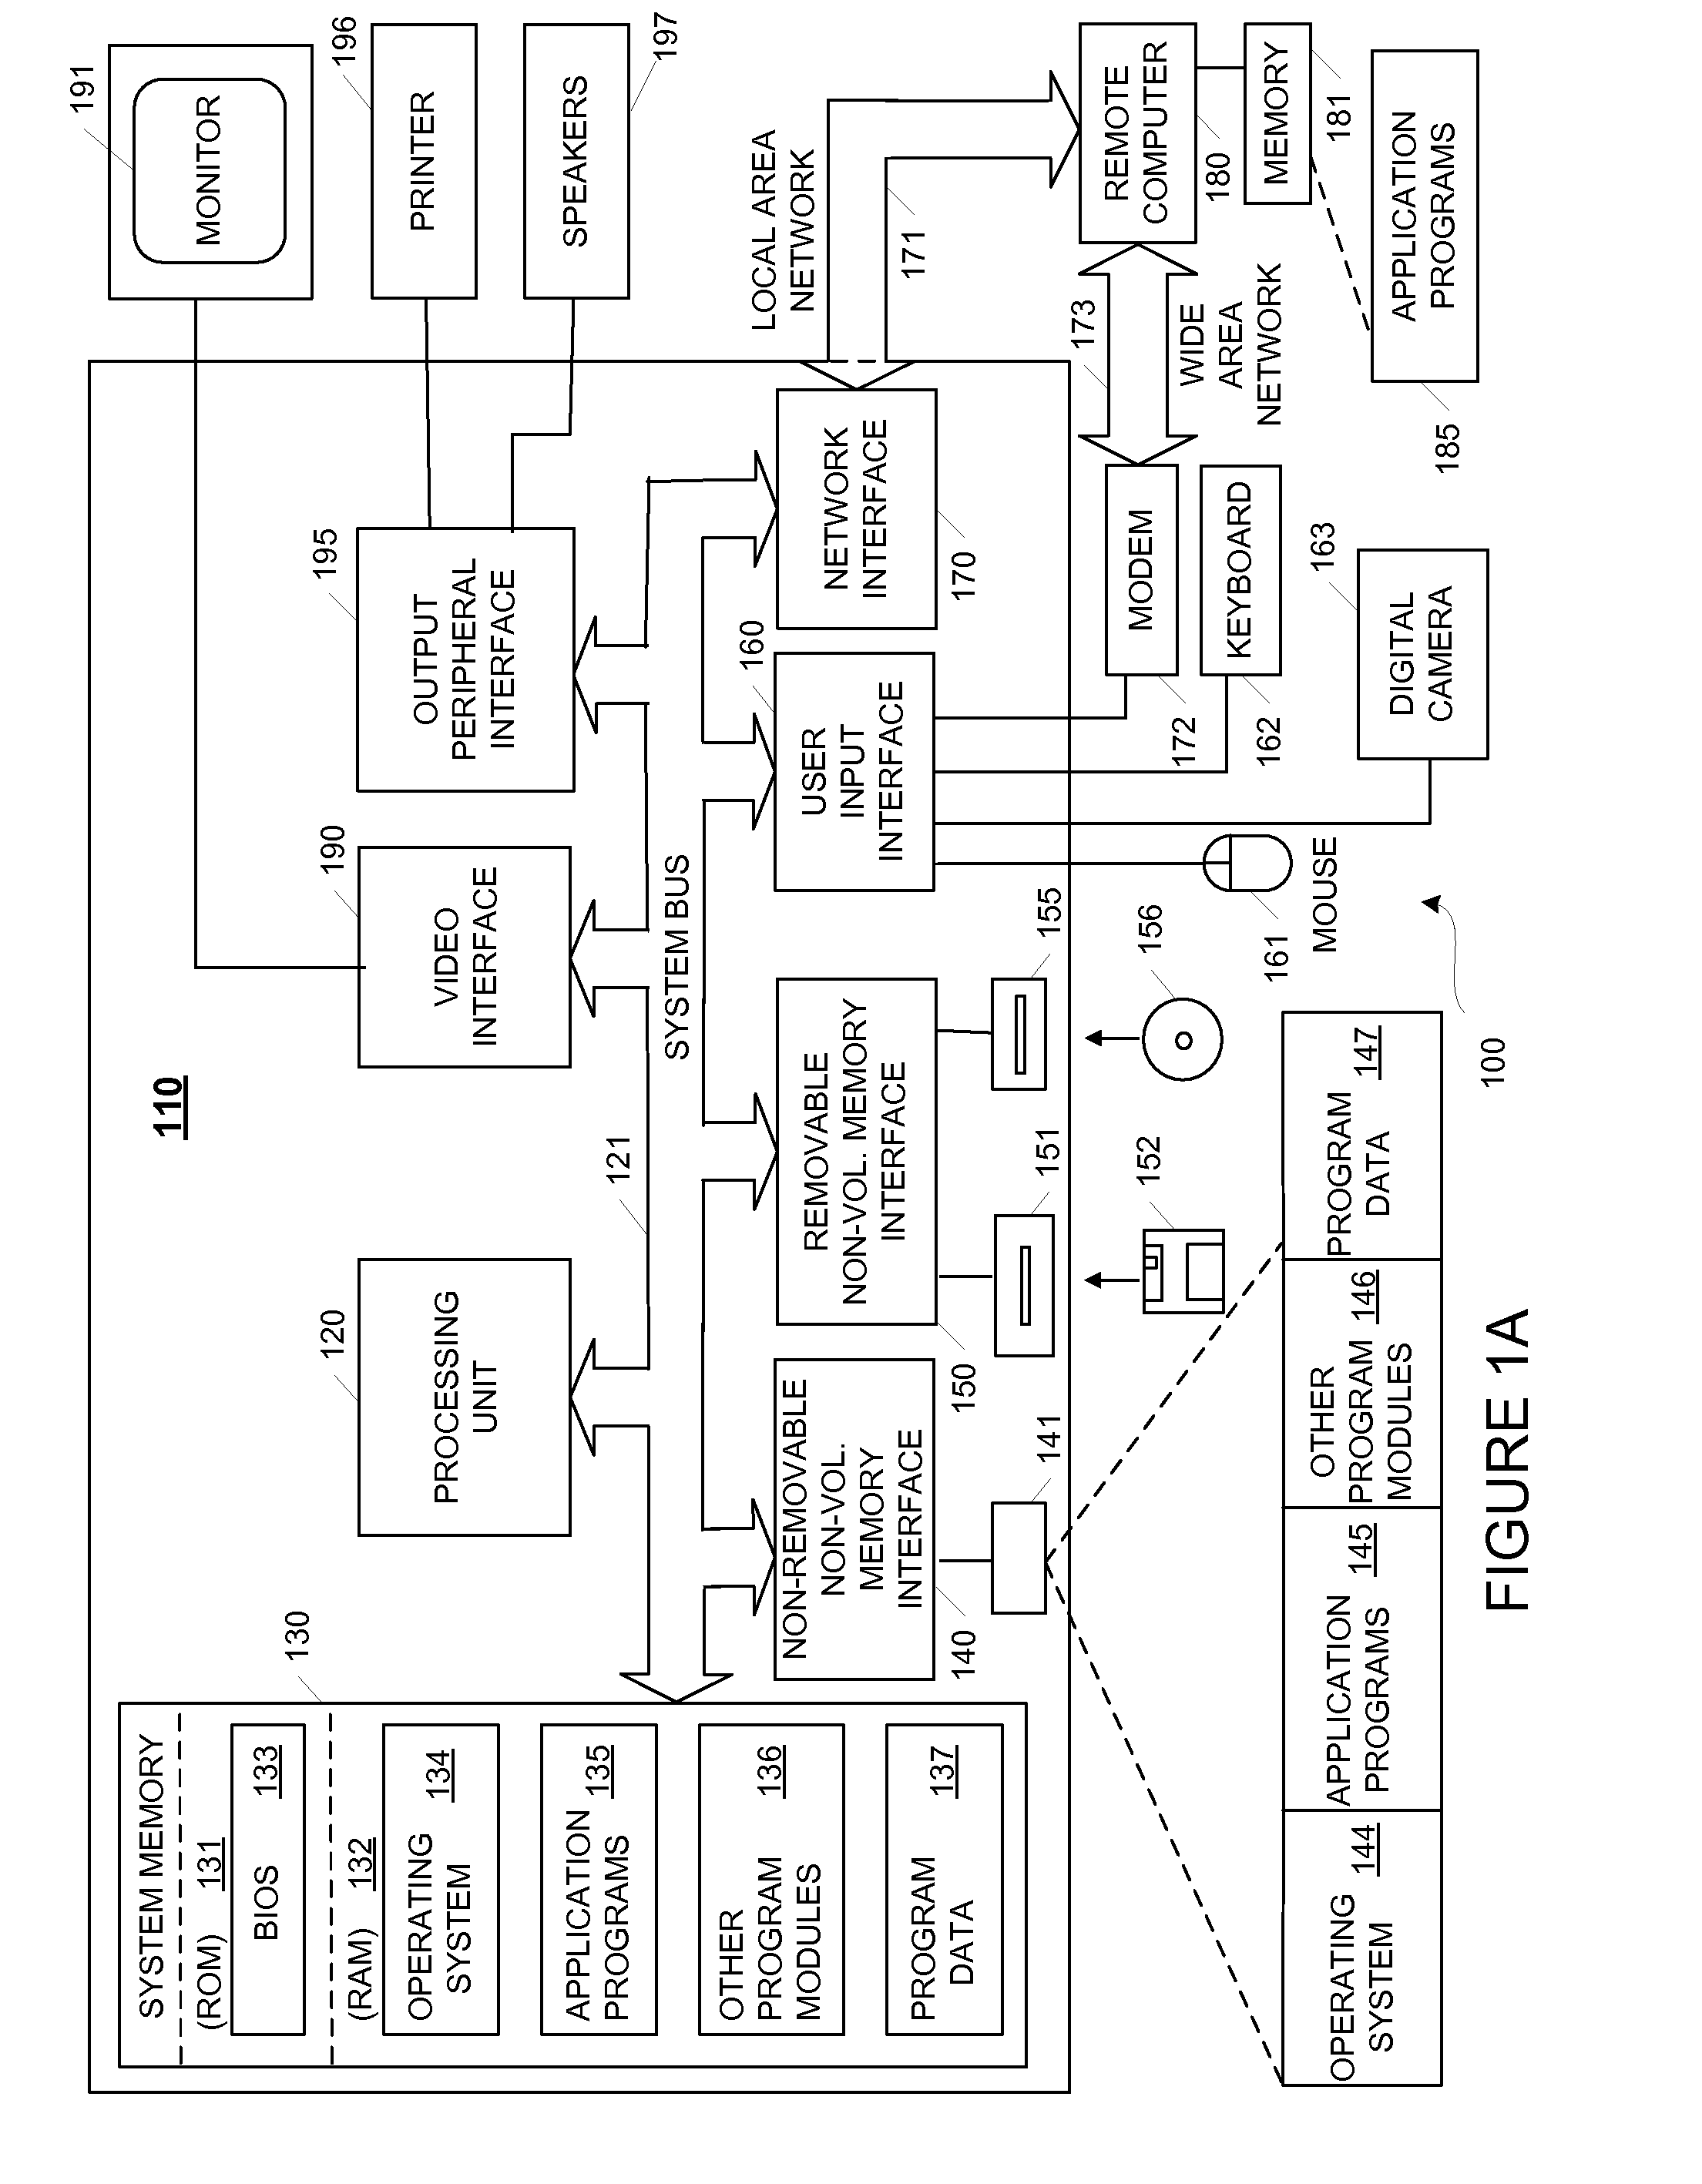 System and Method for Providing a Window Management Mode